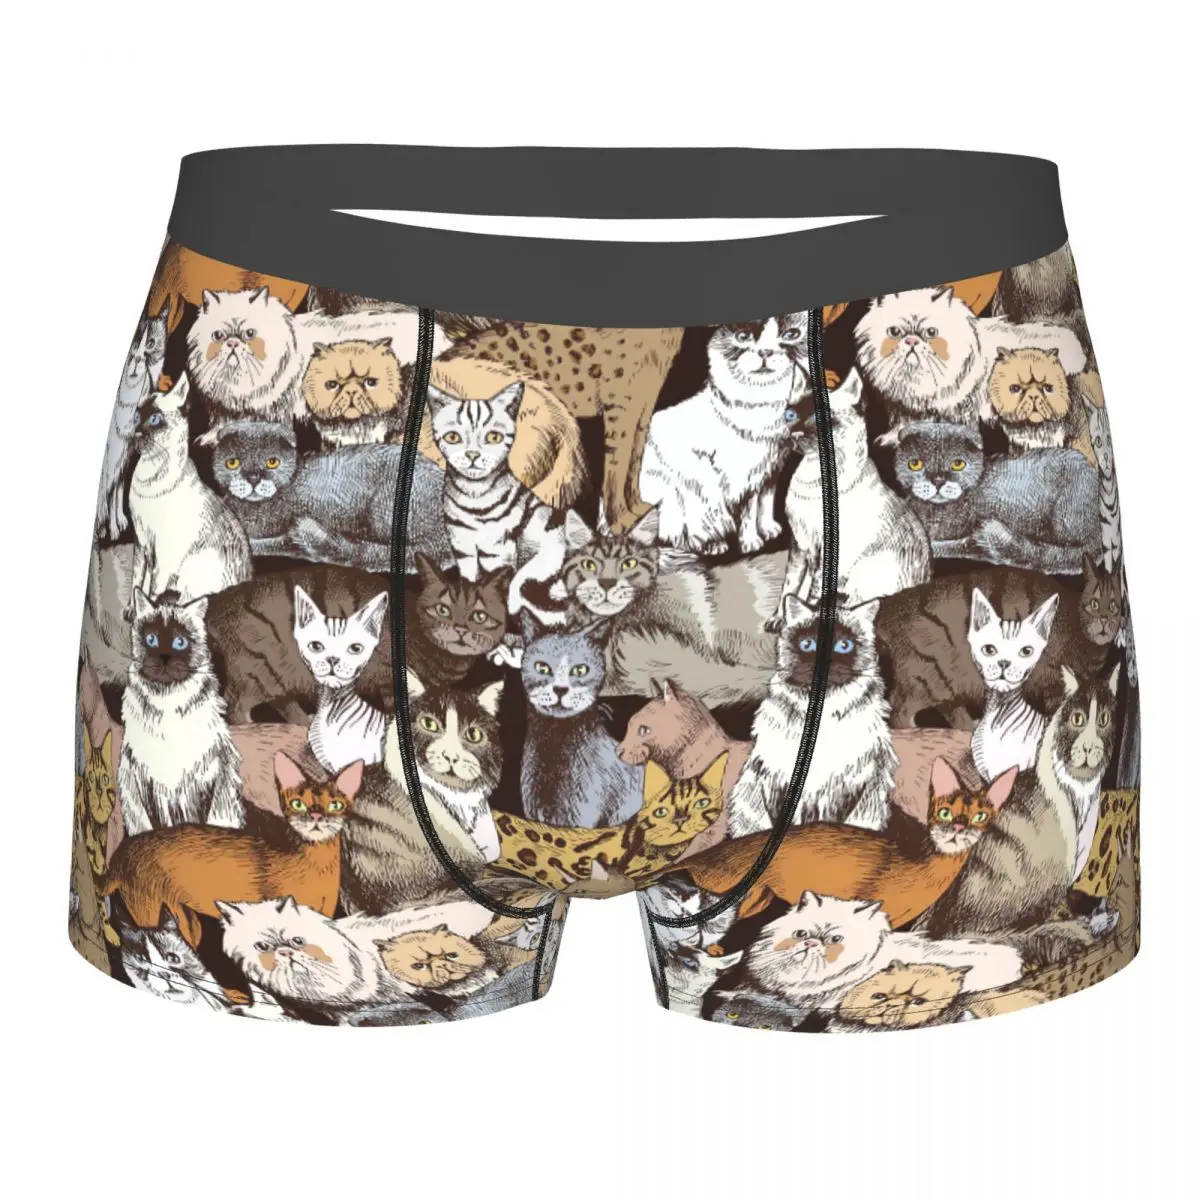 Seamless Pattern Purebred Cats Underpants Breathbale Panties Male Underwear Print Shorts Boxer Briefs pattern printing imd tpu gel case cover for iphone xr 6 1 inch cartoon cats